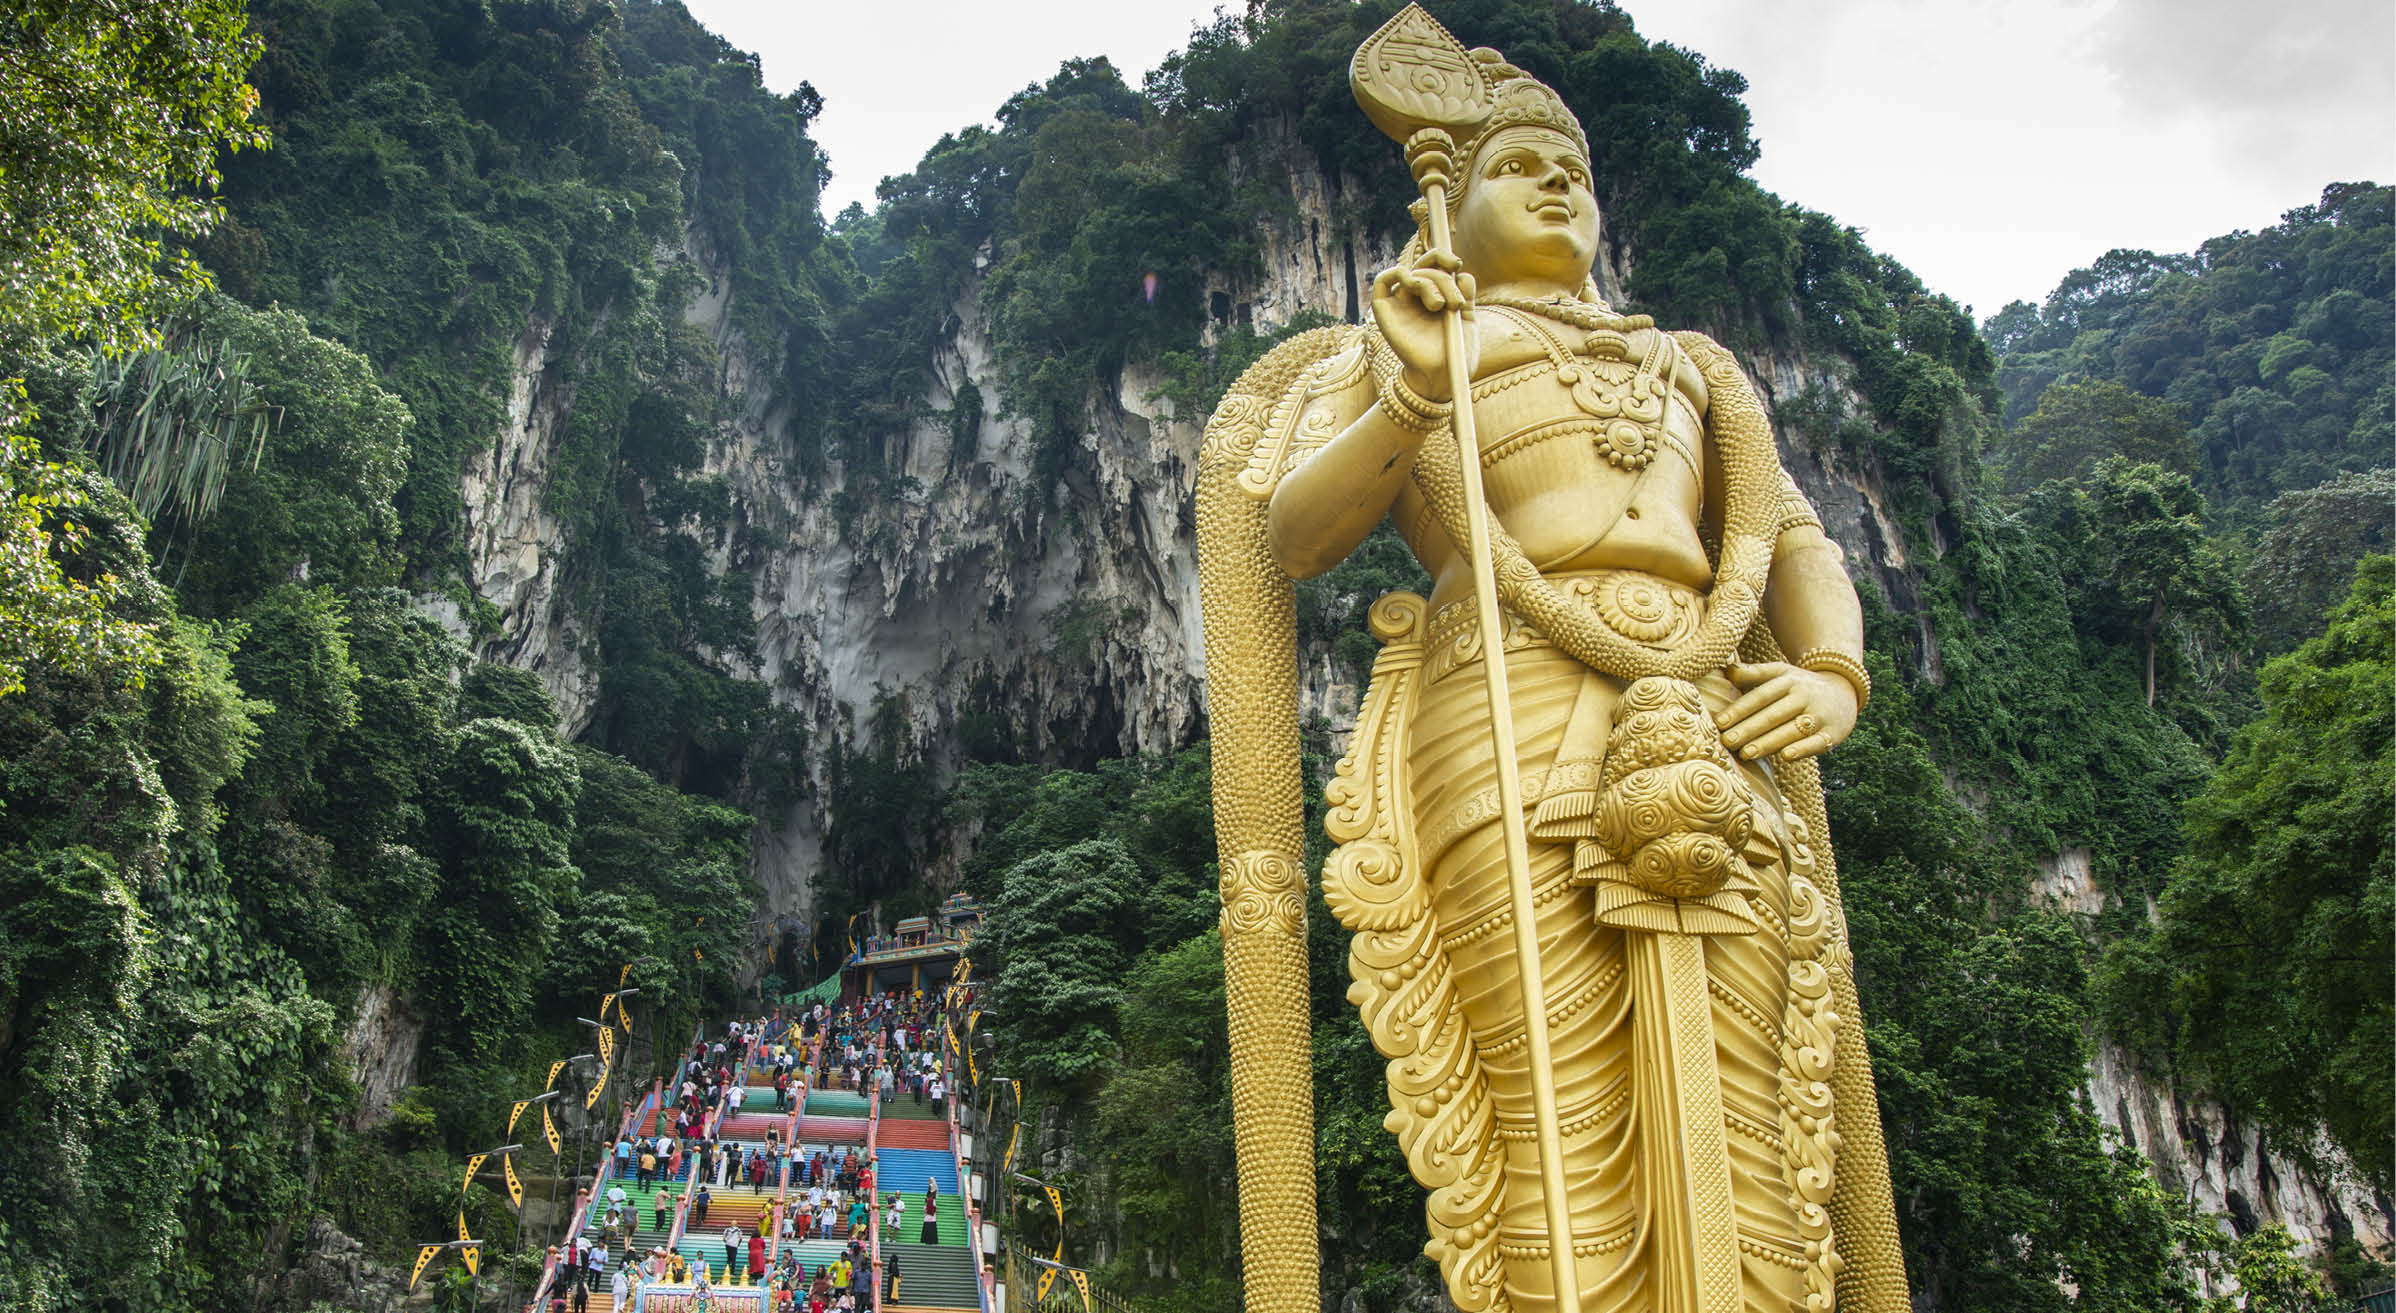 Kuala Lumpur attractions Batu Caves with the golden statue